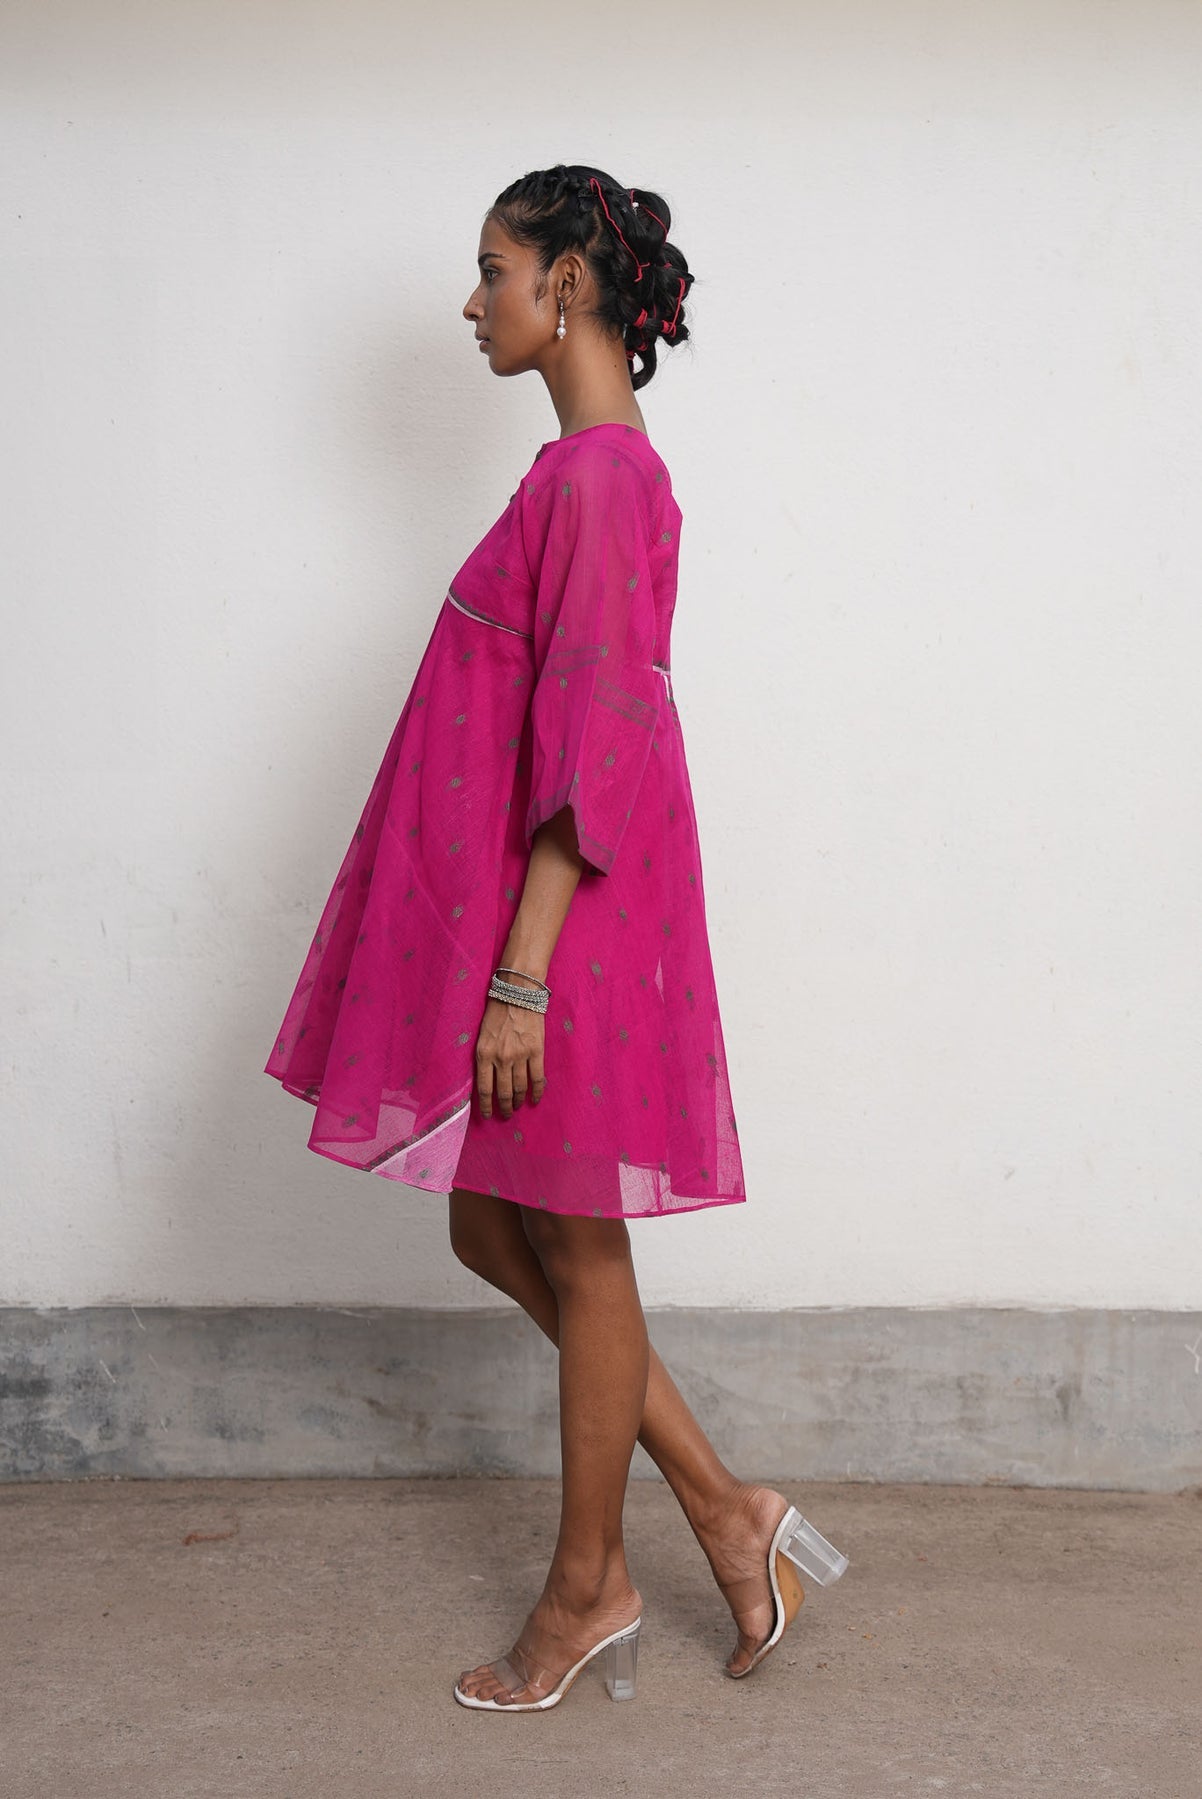 LIMITED EDITION - PINK DRESS IN PURE HANDWOVEN BENGALI COTTON (TAANT)